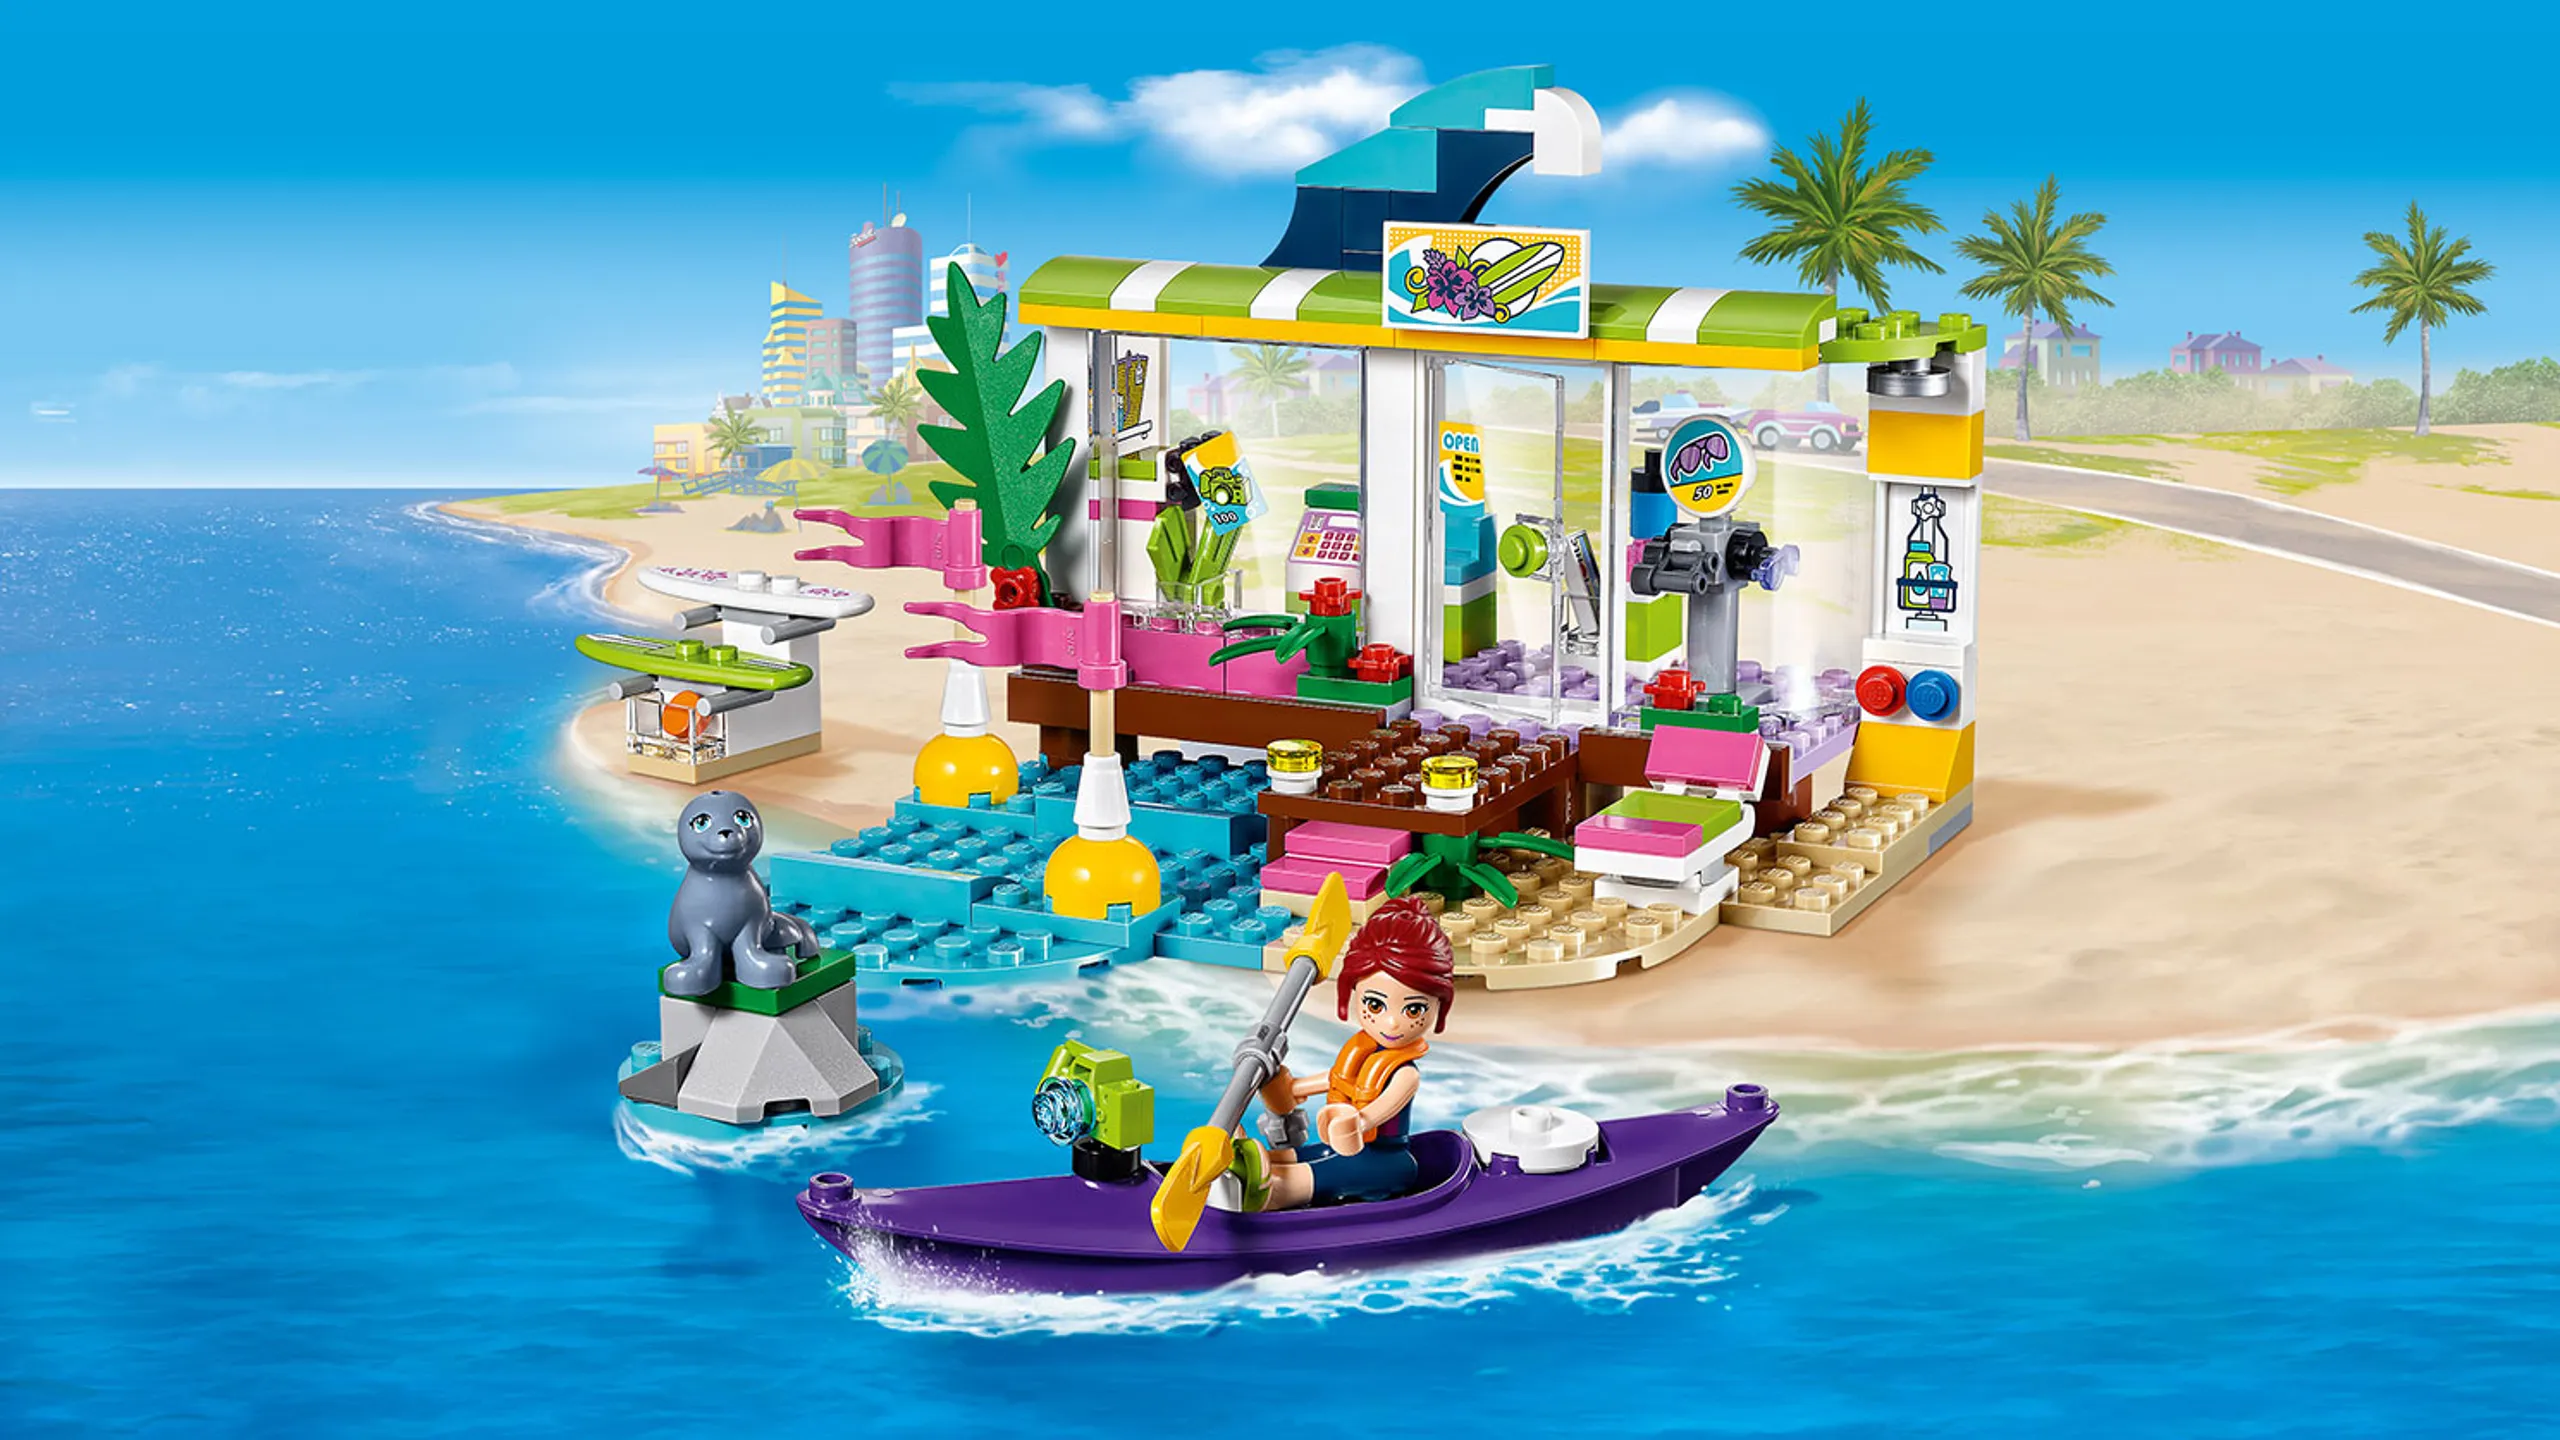 LEGO Friends - 41315 Heartlake Surf Shop - Mia paddles in her kayak in front of the Surf Shop on the beach and the seal sits on a rock in the sea near the beach.